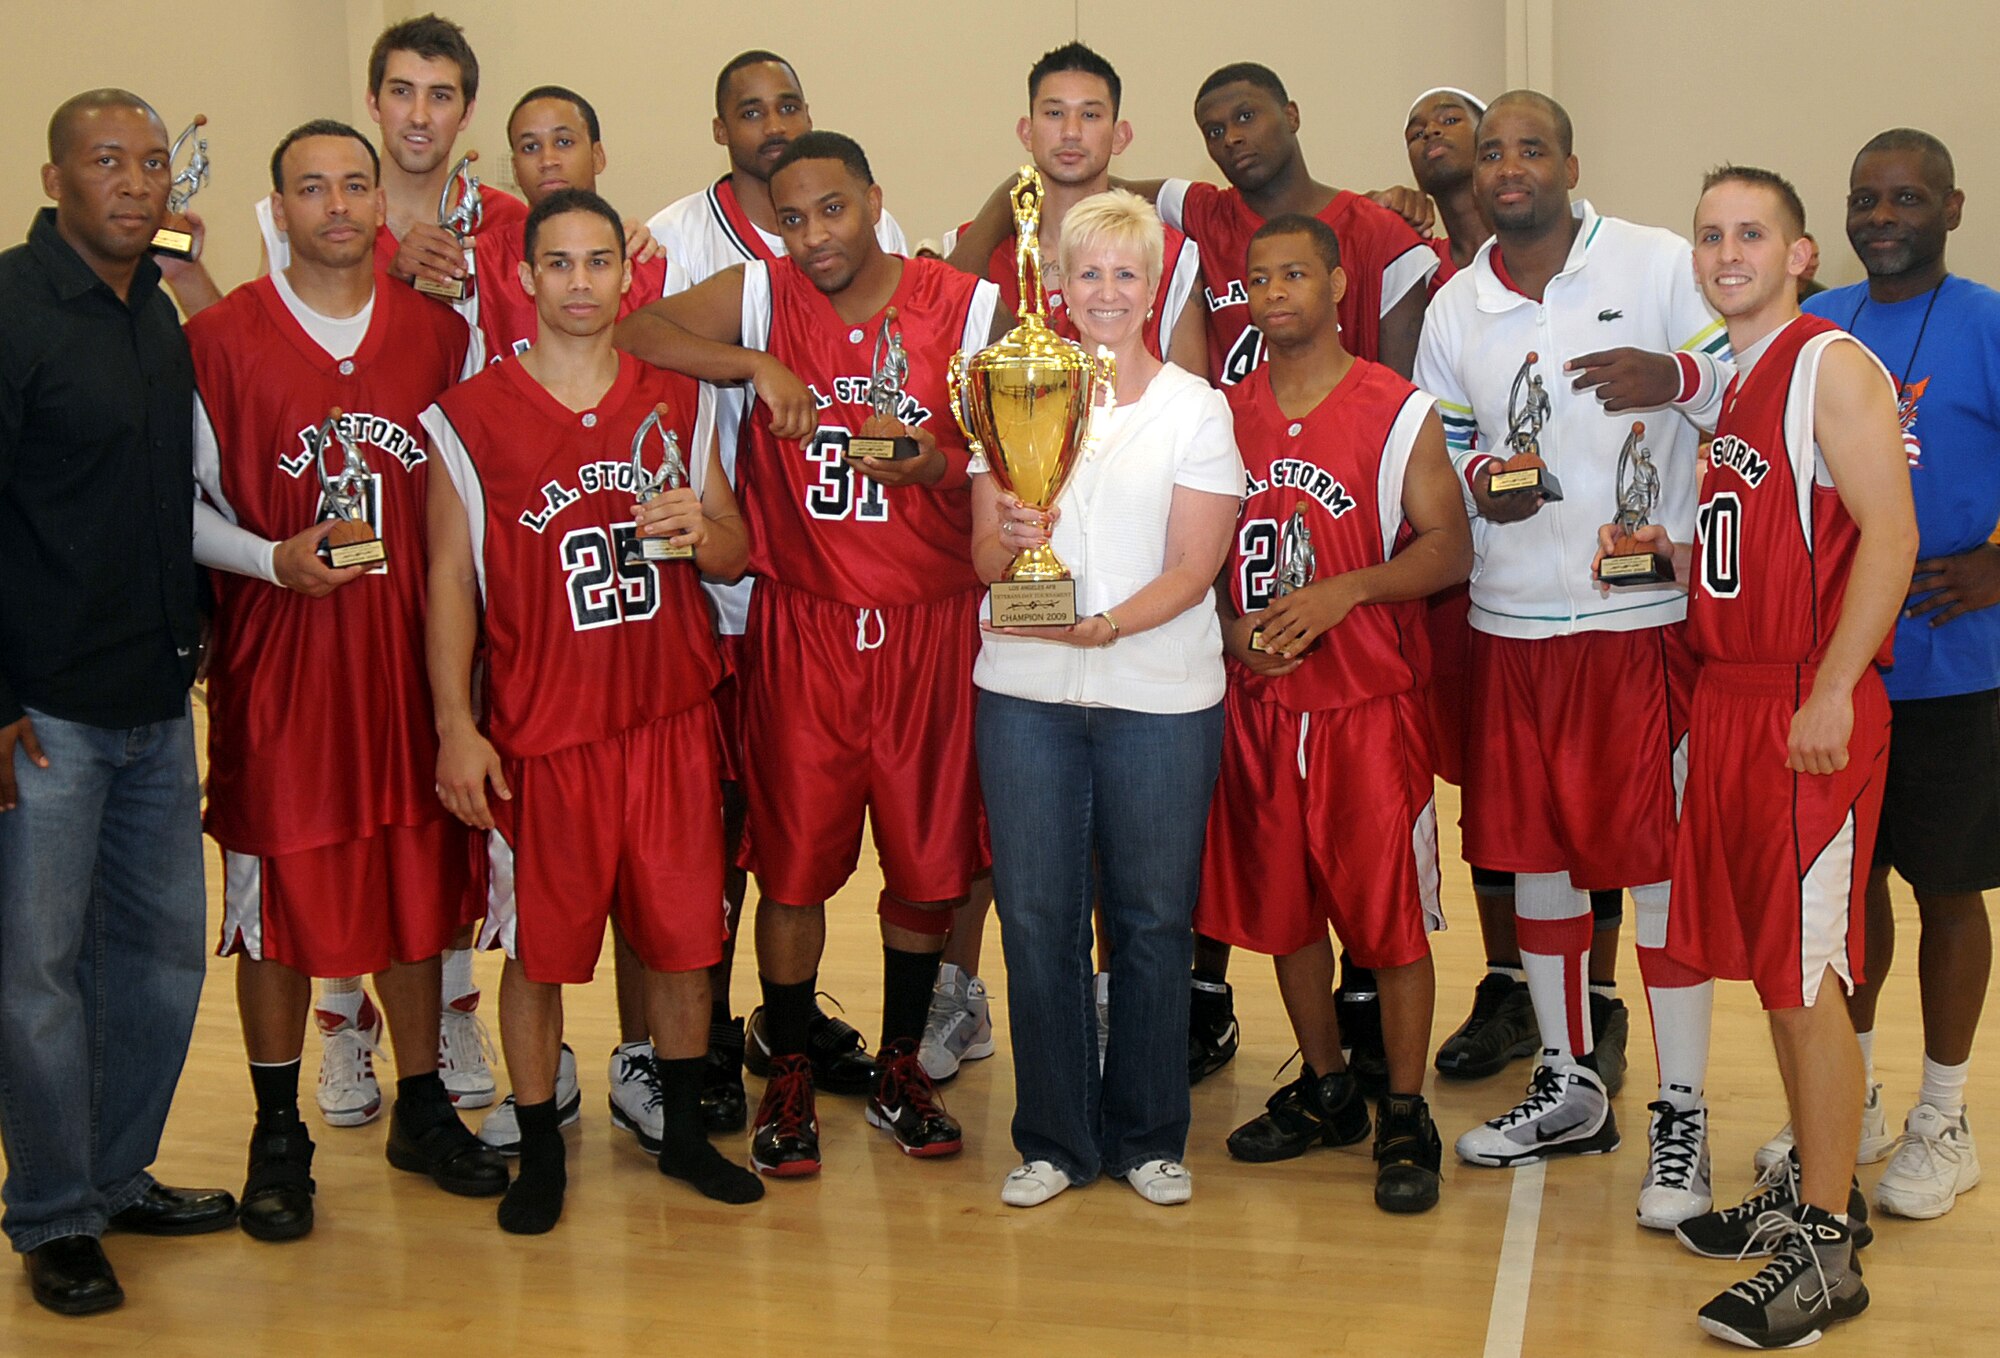 Members of the LA Storm from Los Angeles Air Force Base stand with Col. Anita Latin (center), 61st Air Base Wing commander, after winning the championship trophy, Nov. 8. Los Angeles AFB sponsored the 2009 Veterans Day "SoCal Shootout" Basketball Tournament on Nov. 7 and 8, which included participation from Luke AFB, Travis AFB, Vandenberg AFB, and Edwards AFB. The LA Storm won the championship title with an 80 to 77 victory over Travis. (Photo by Atiba Copeland)